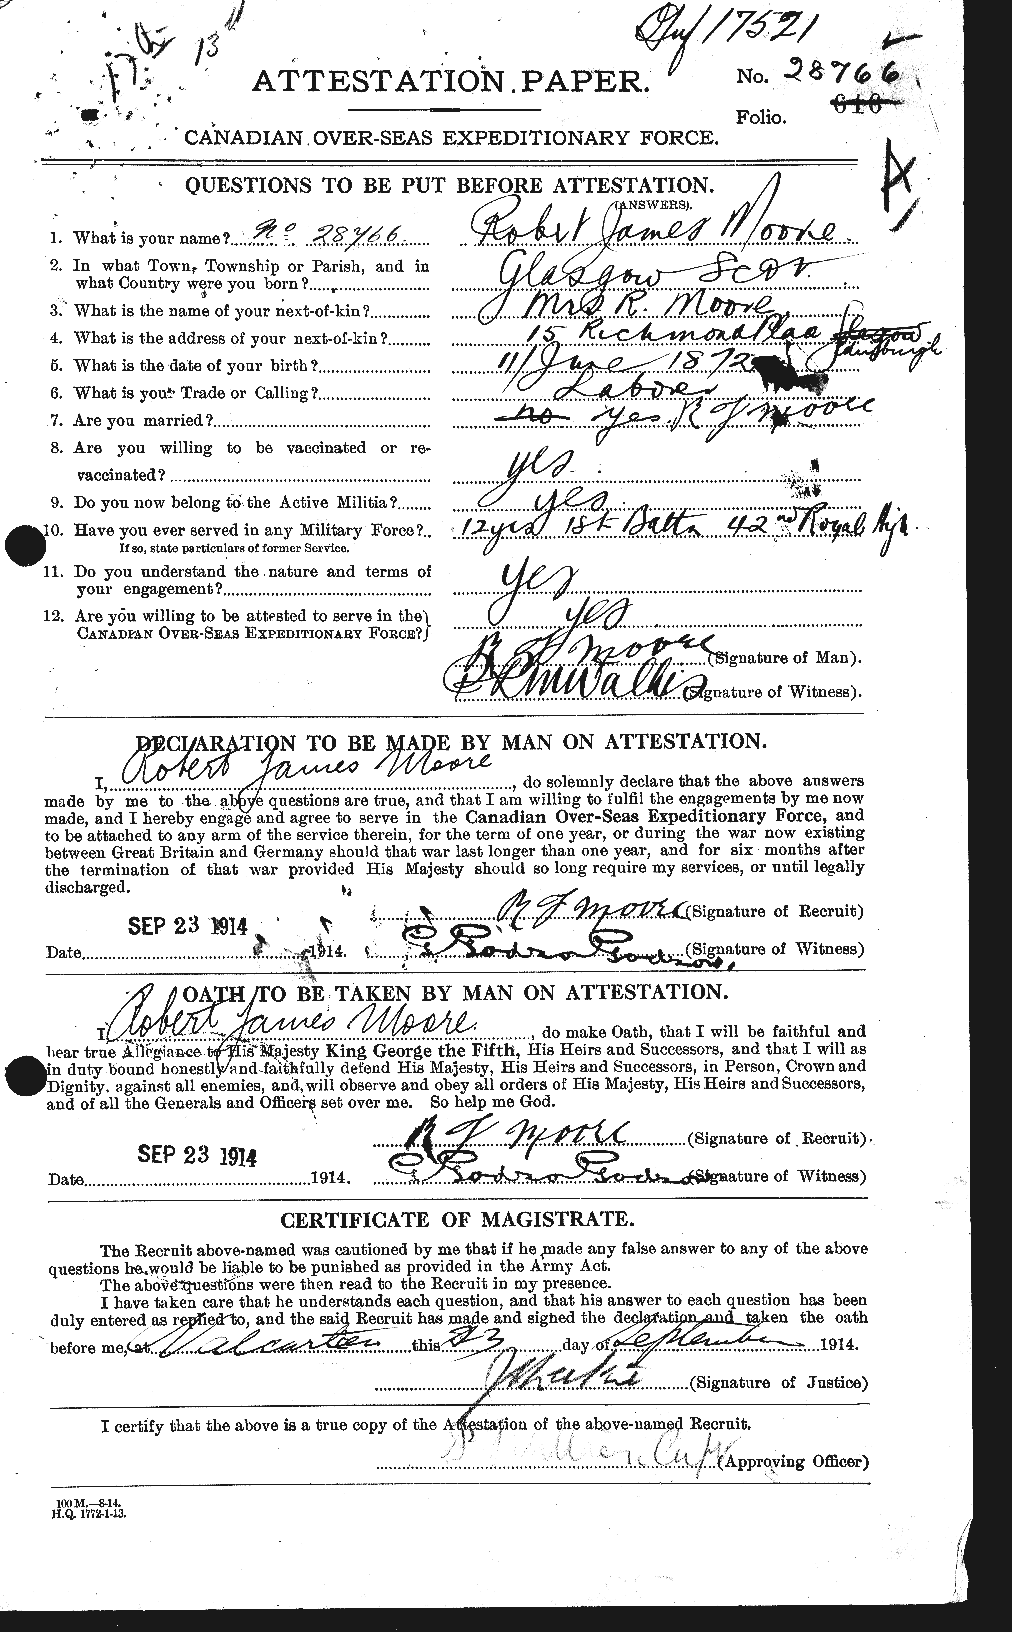 Personnel Records of the First World War - CEF 503574a